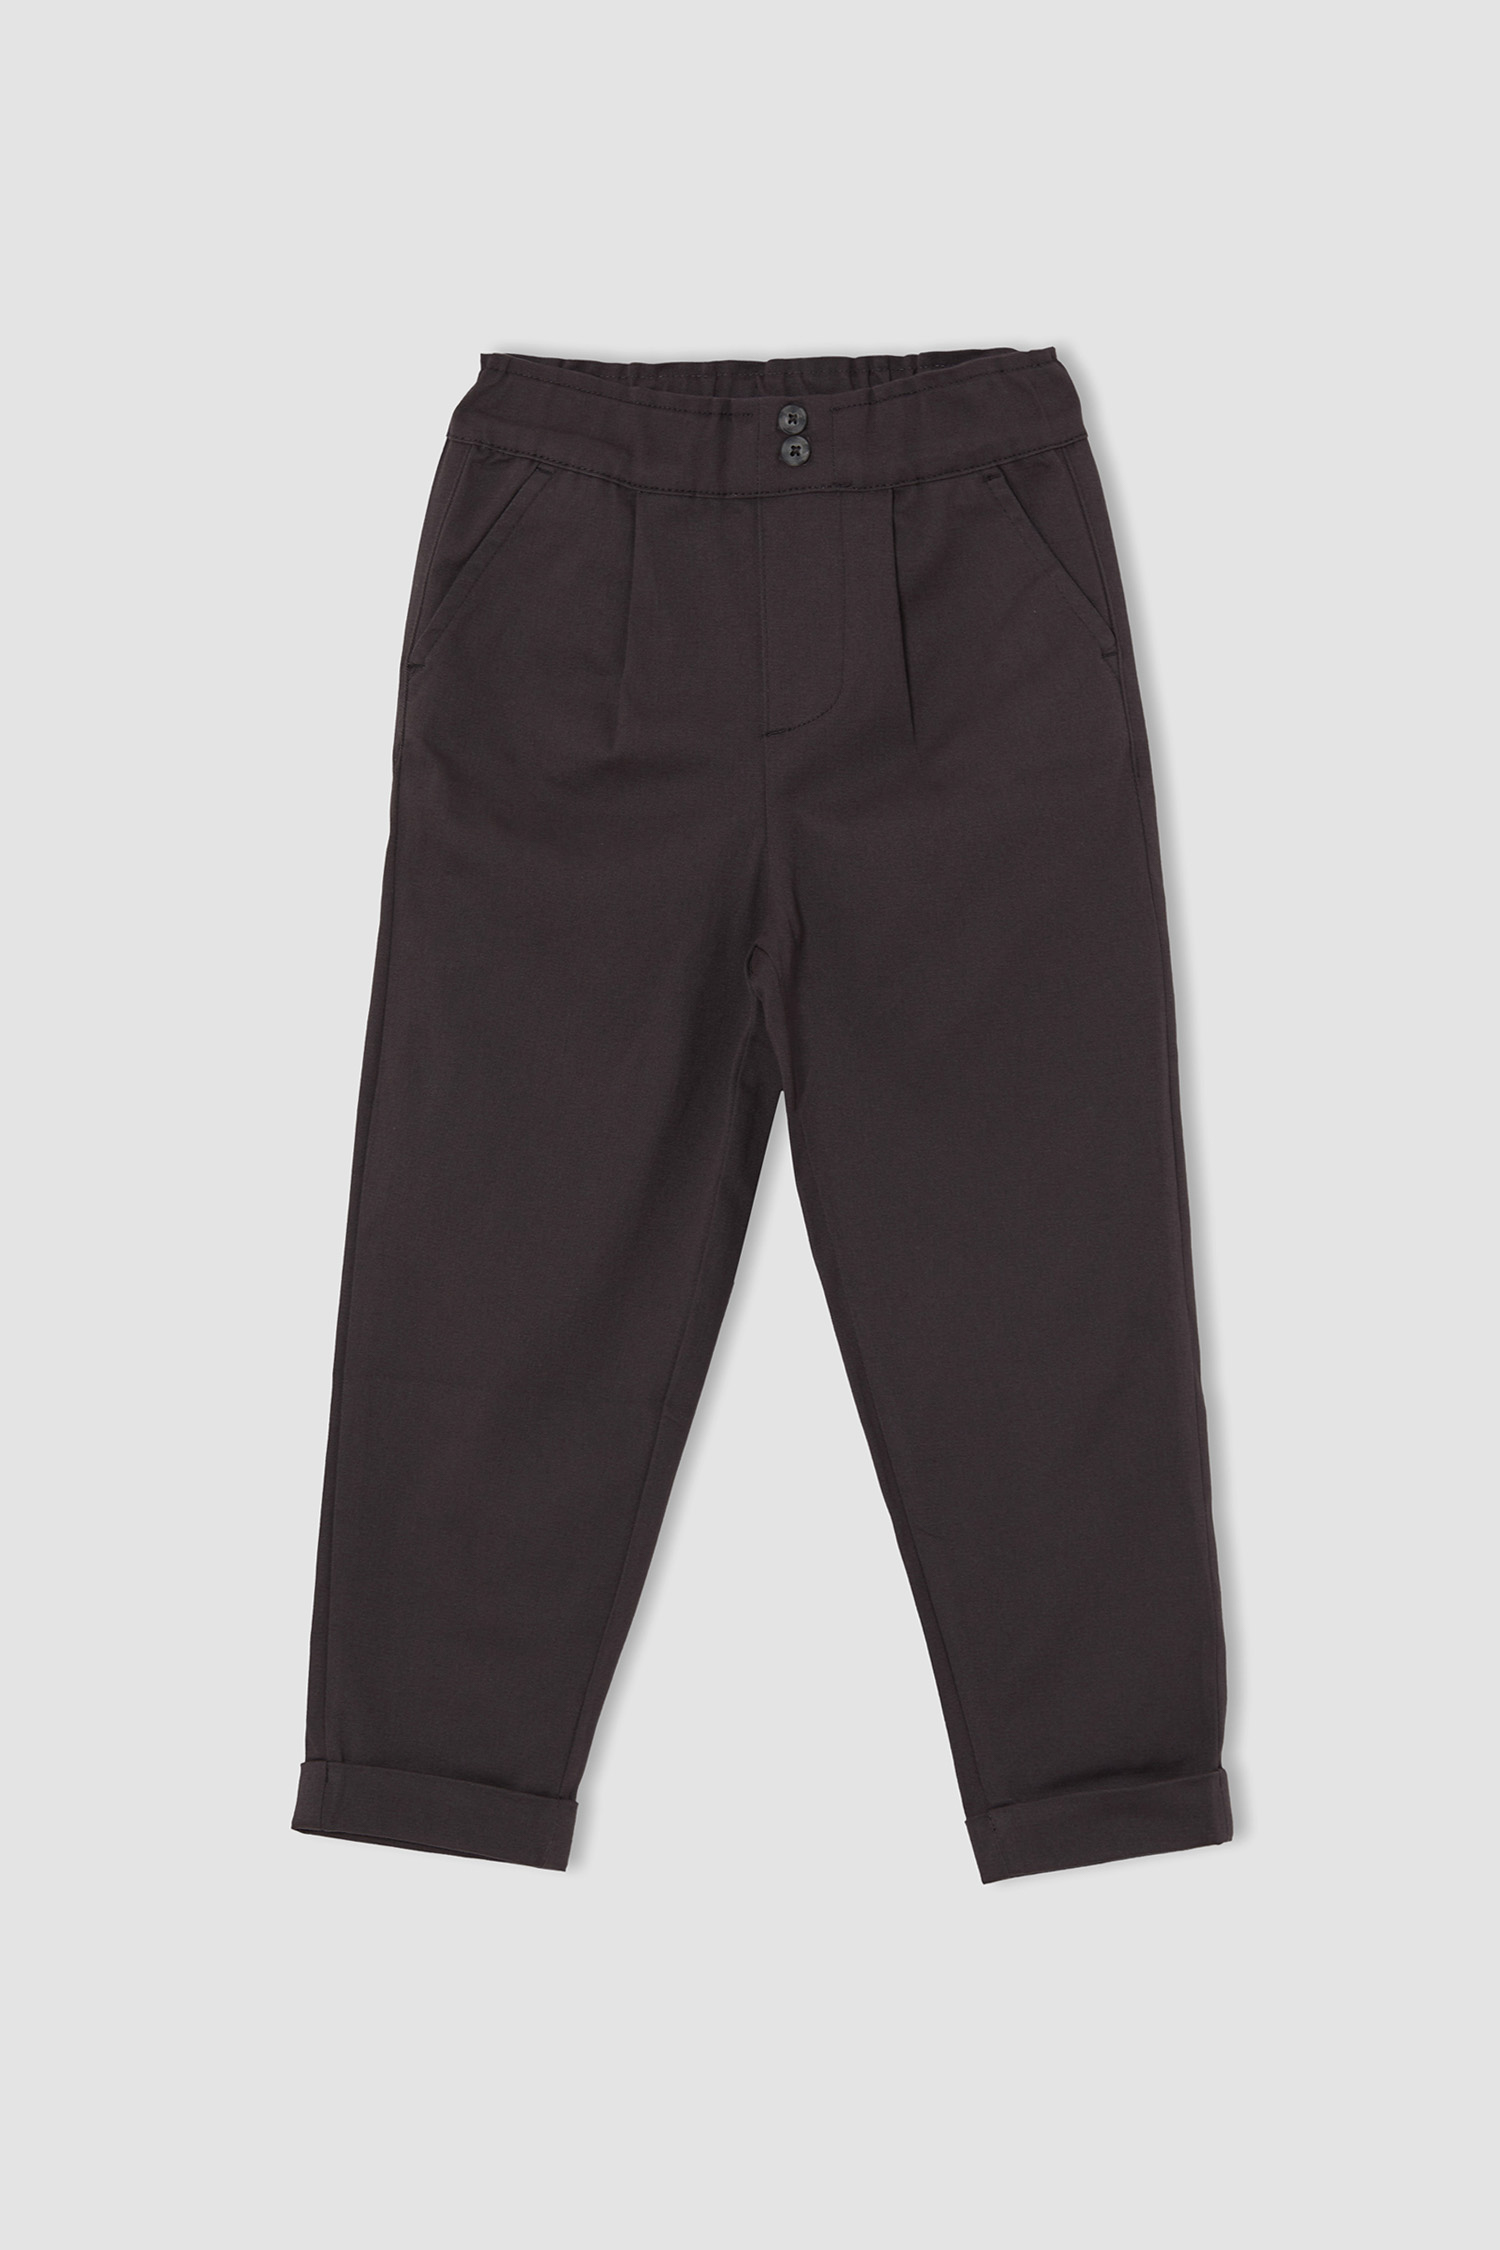 DeFacto Carrot Fit Trousers 褲子